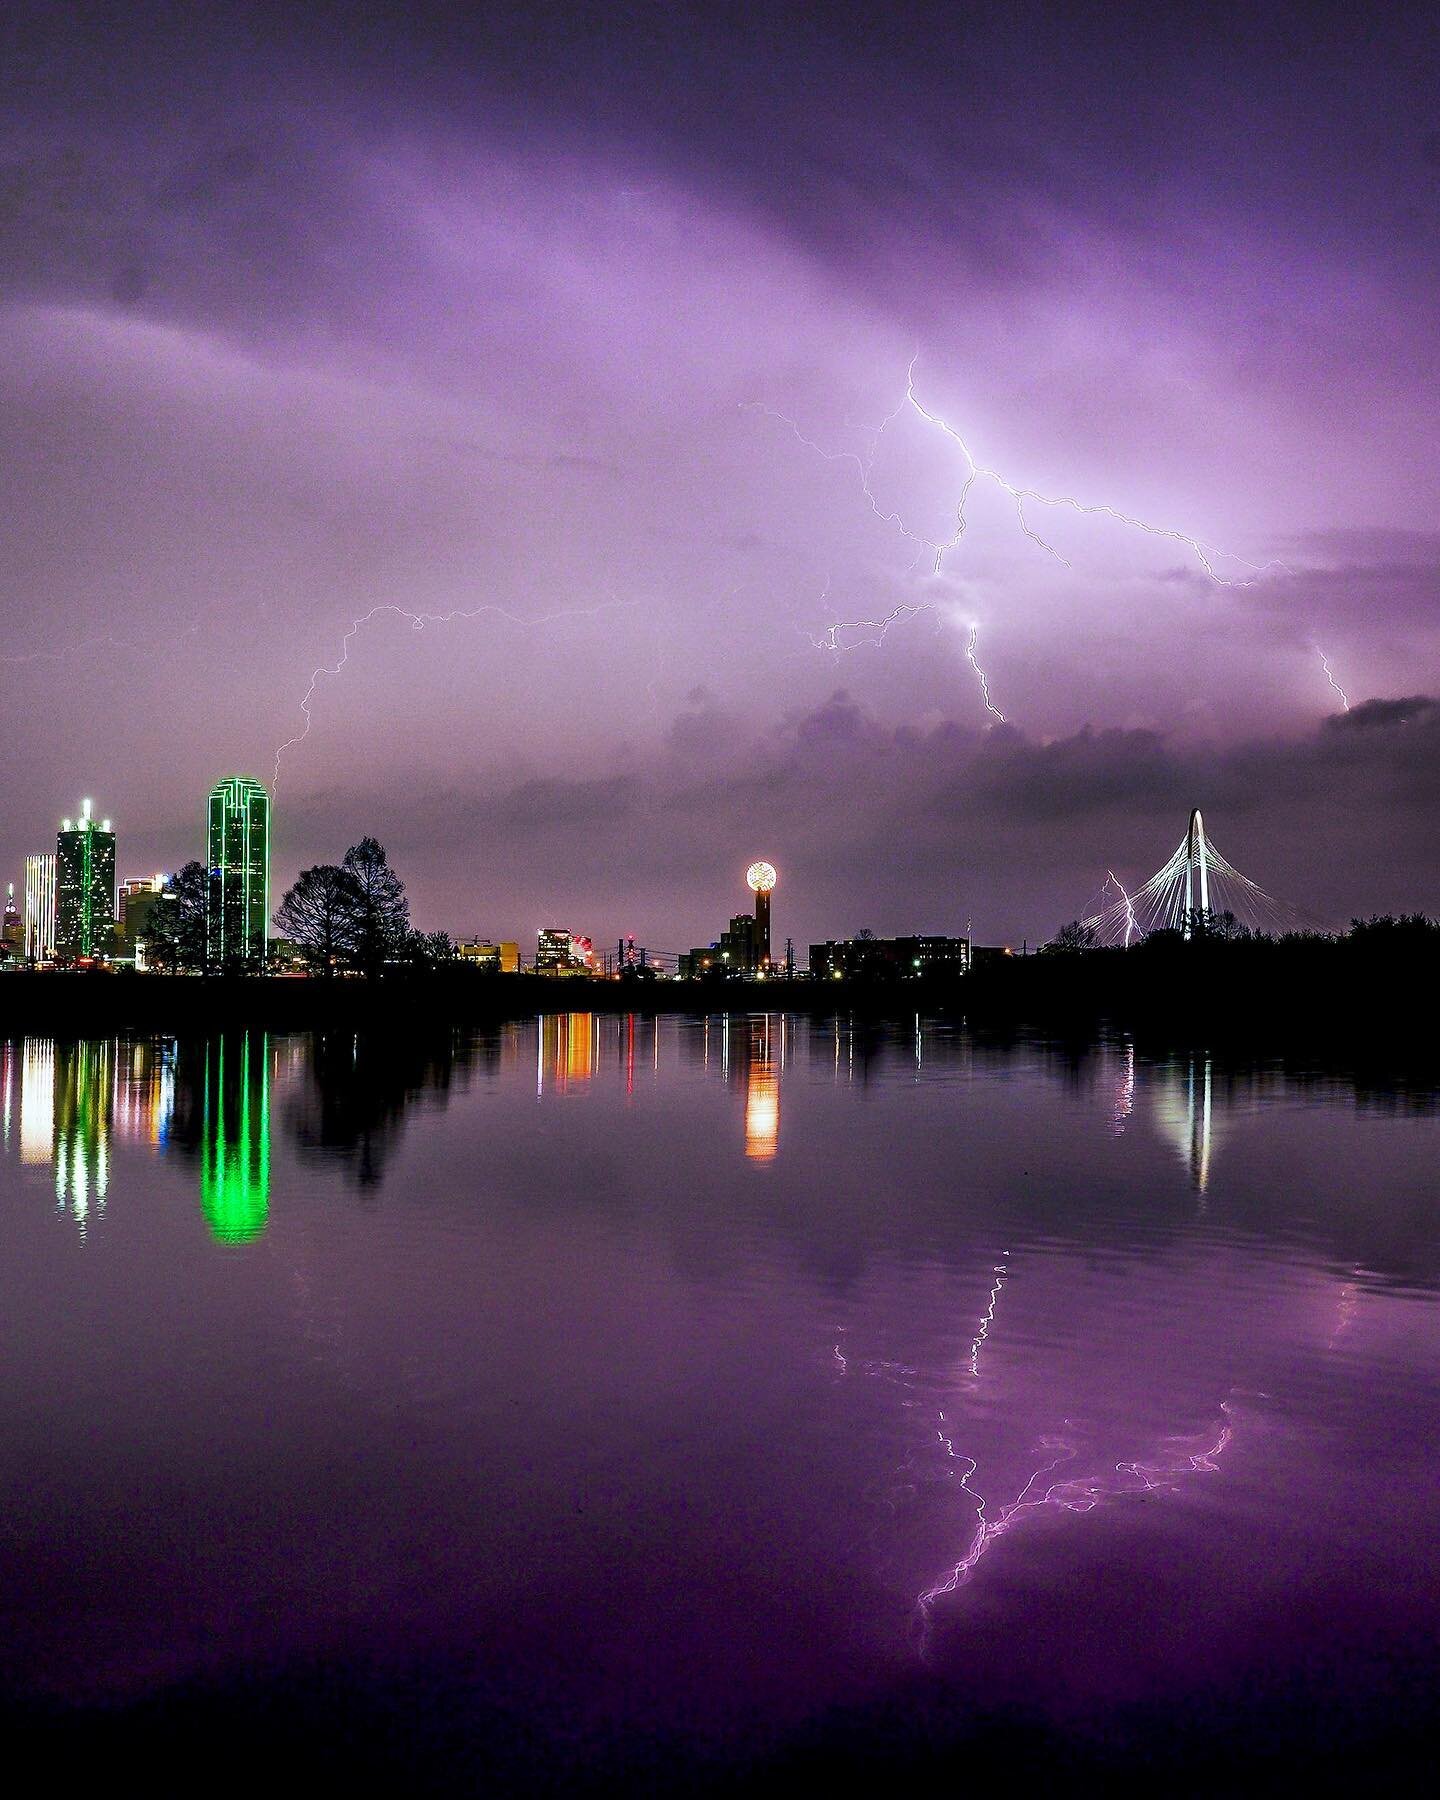 My mind is a minefield full of metaphors. Watch your step.

#dallas #dallastexas #igtexas #txwx #texas #storm #stormchasing #dallasskyline #downtowndallas #lightning #lightningphotography